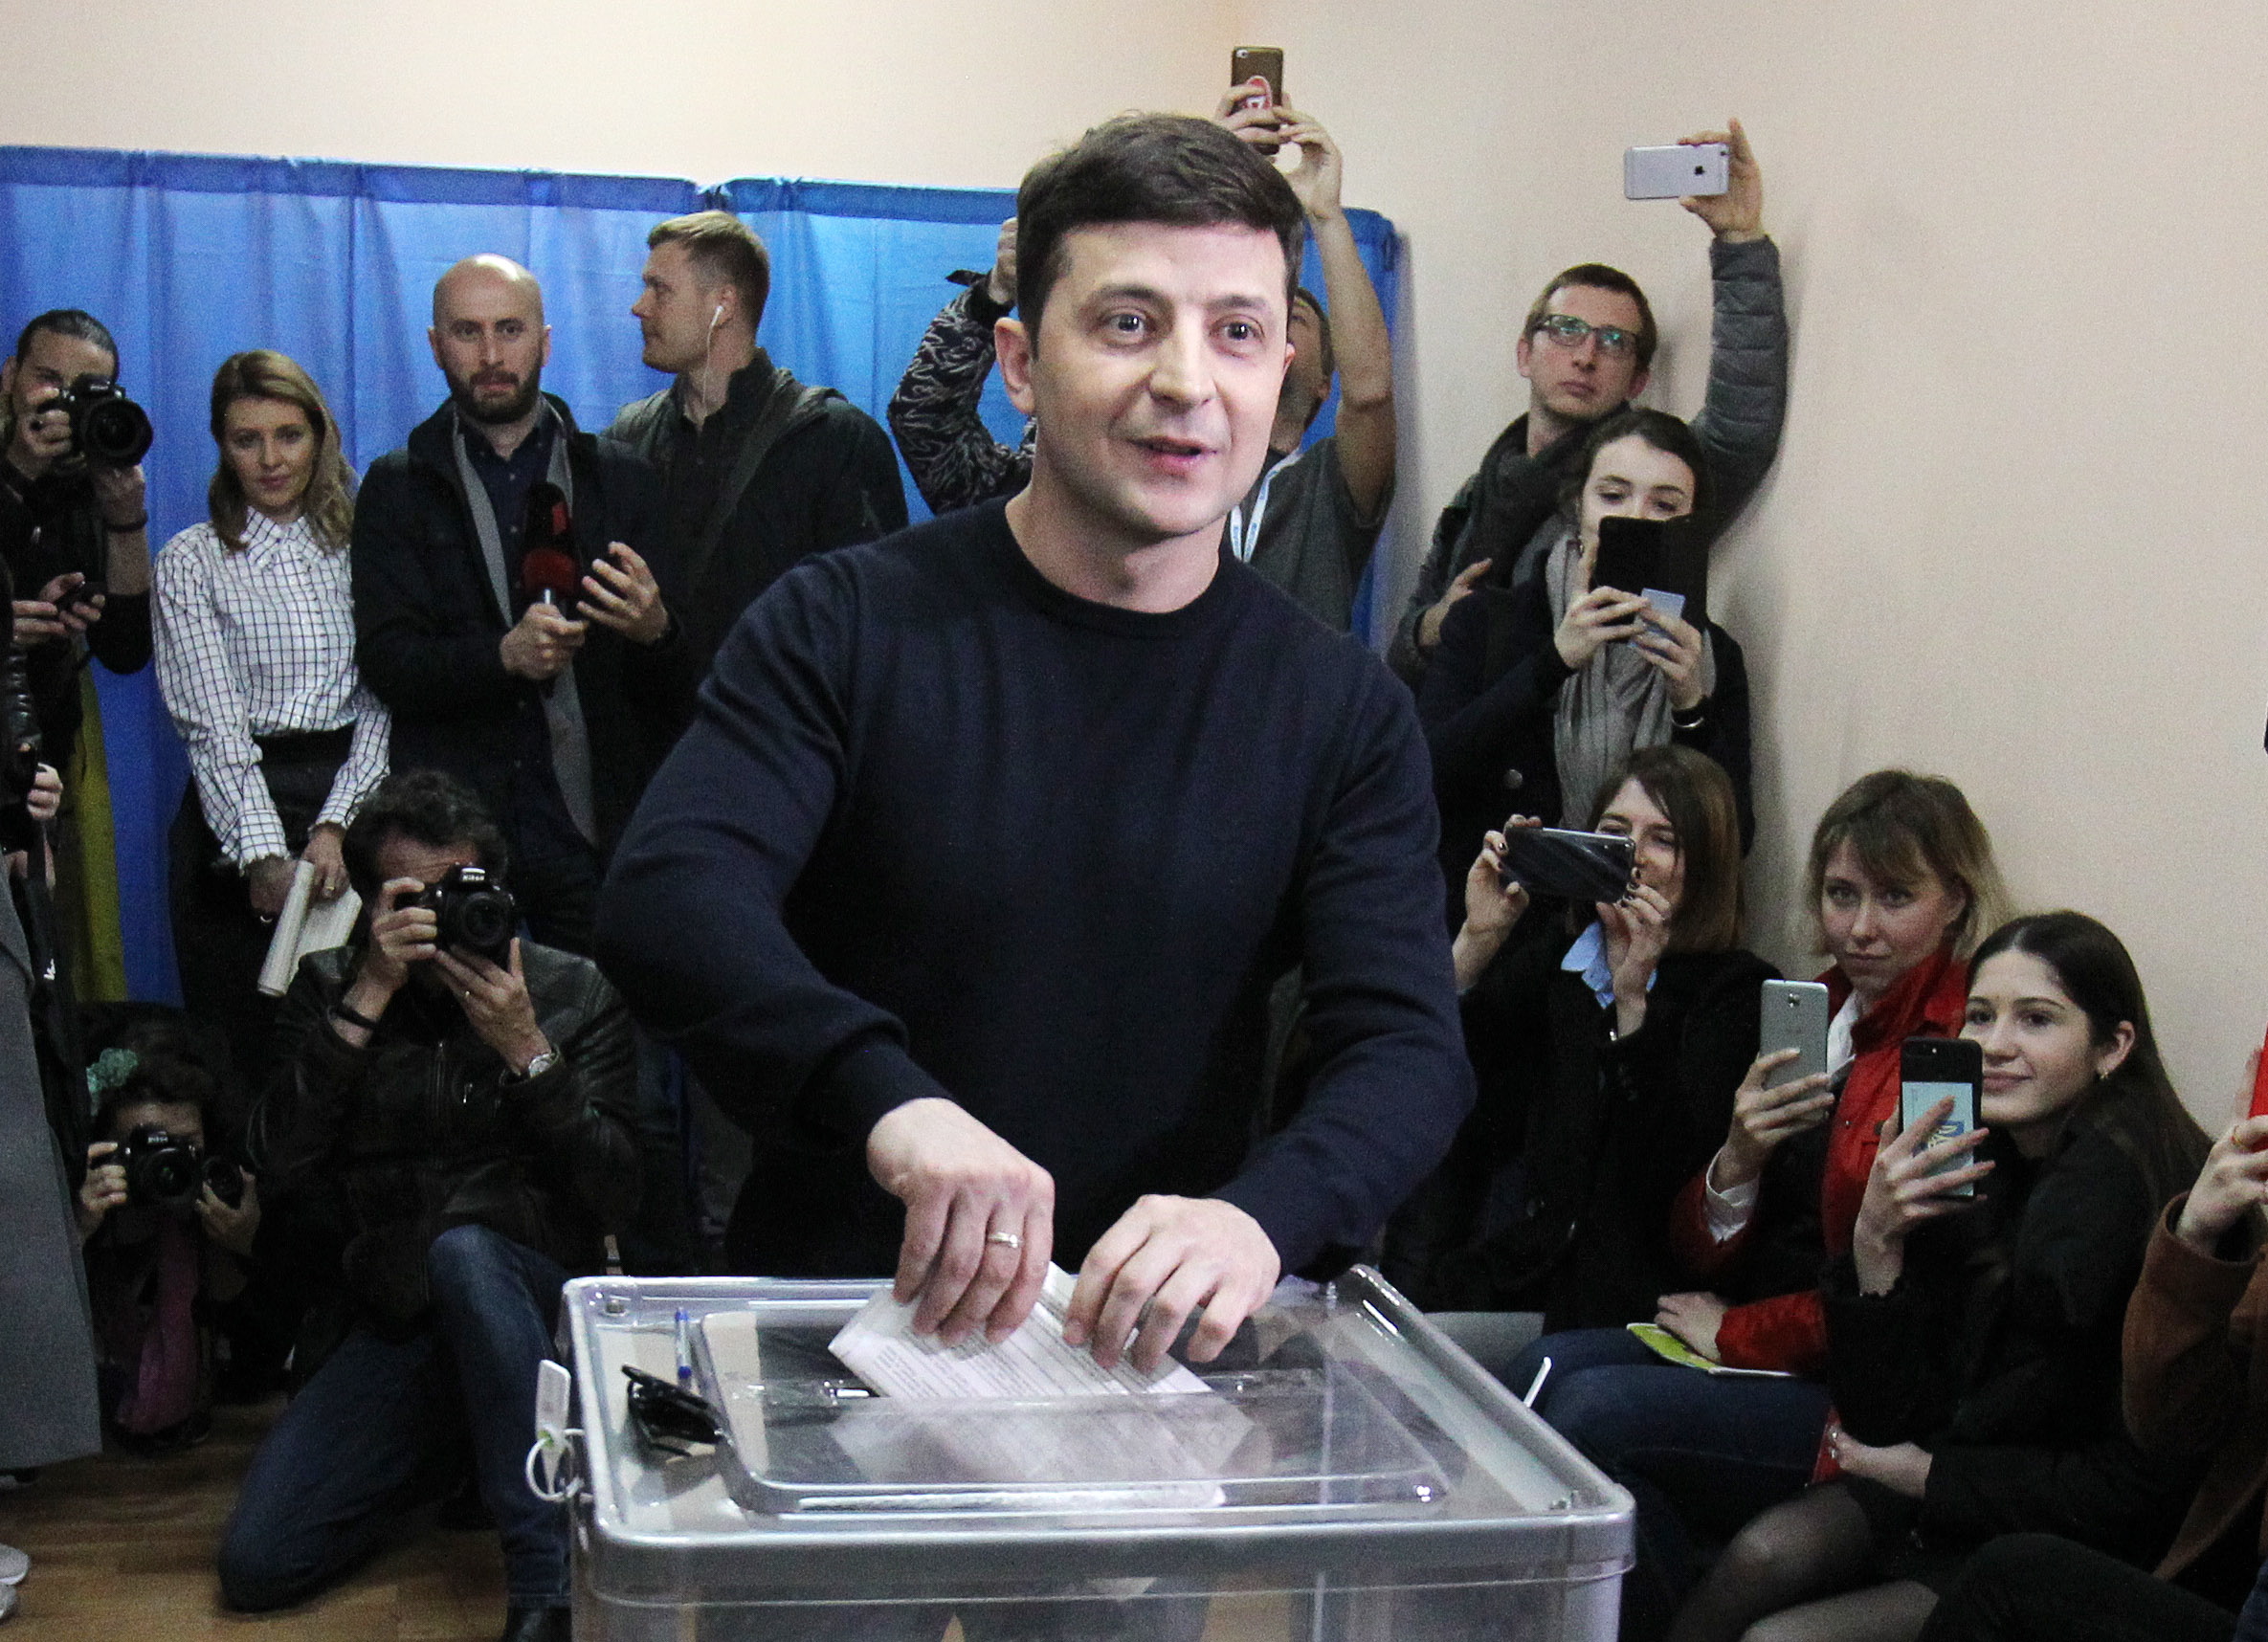 epa07475579 Ukrainian showman, comedian, and presidential candidate Volodymyr Zelenskiy (C) casts his ballot at a polling station in Kiev, Ukraine, 31 March 2019. Ukraine votes for one of 39 candidates on 31 March to decide on the country's new president.  EPA/STEPAN FRANKO